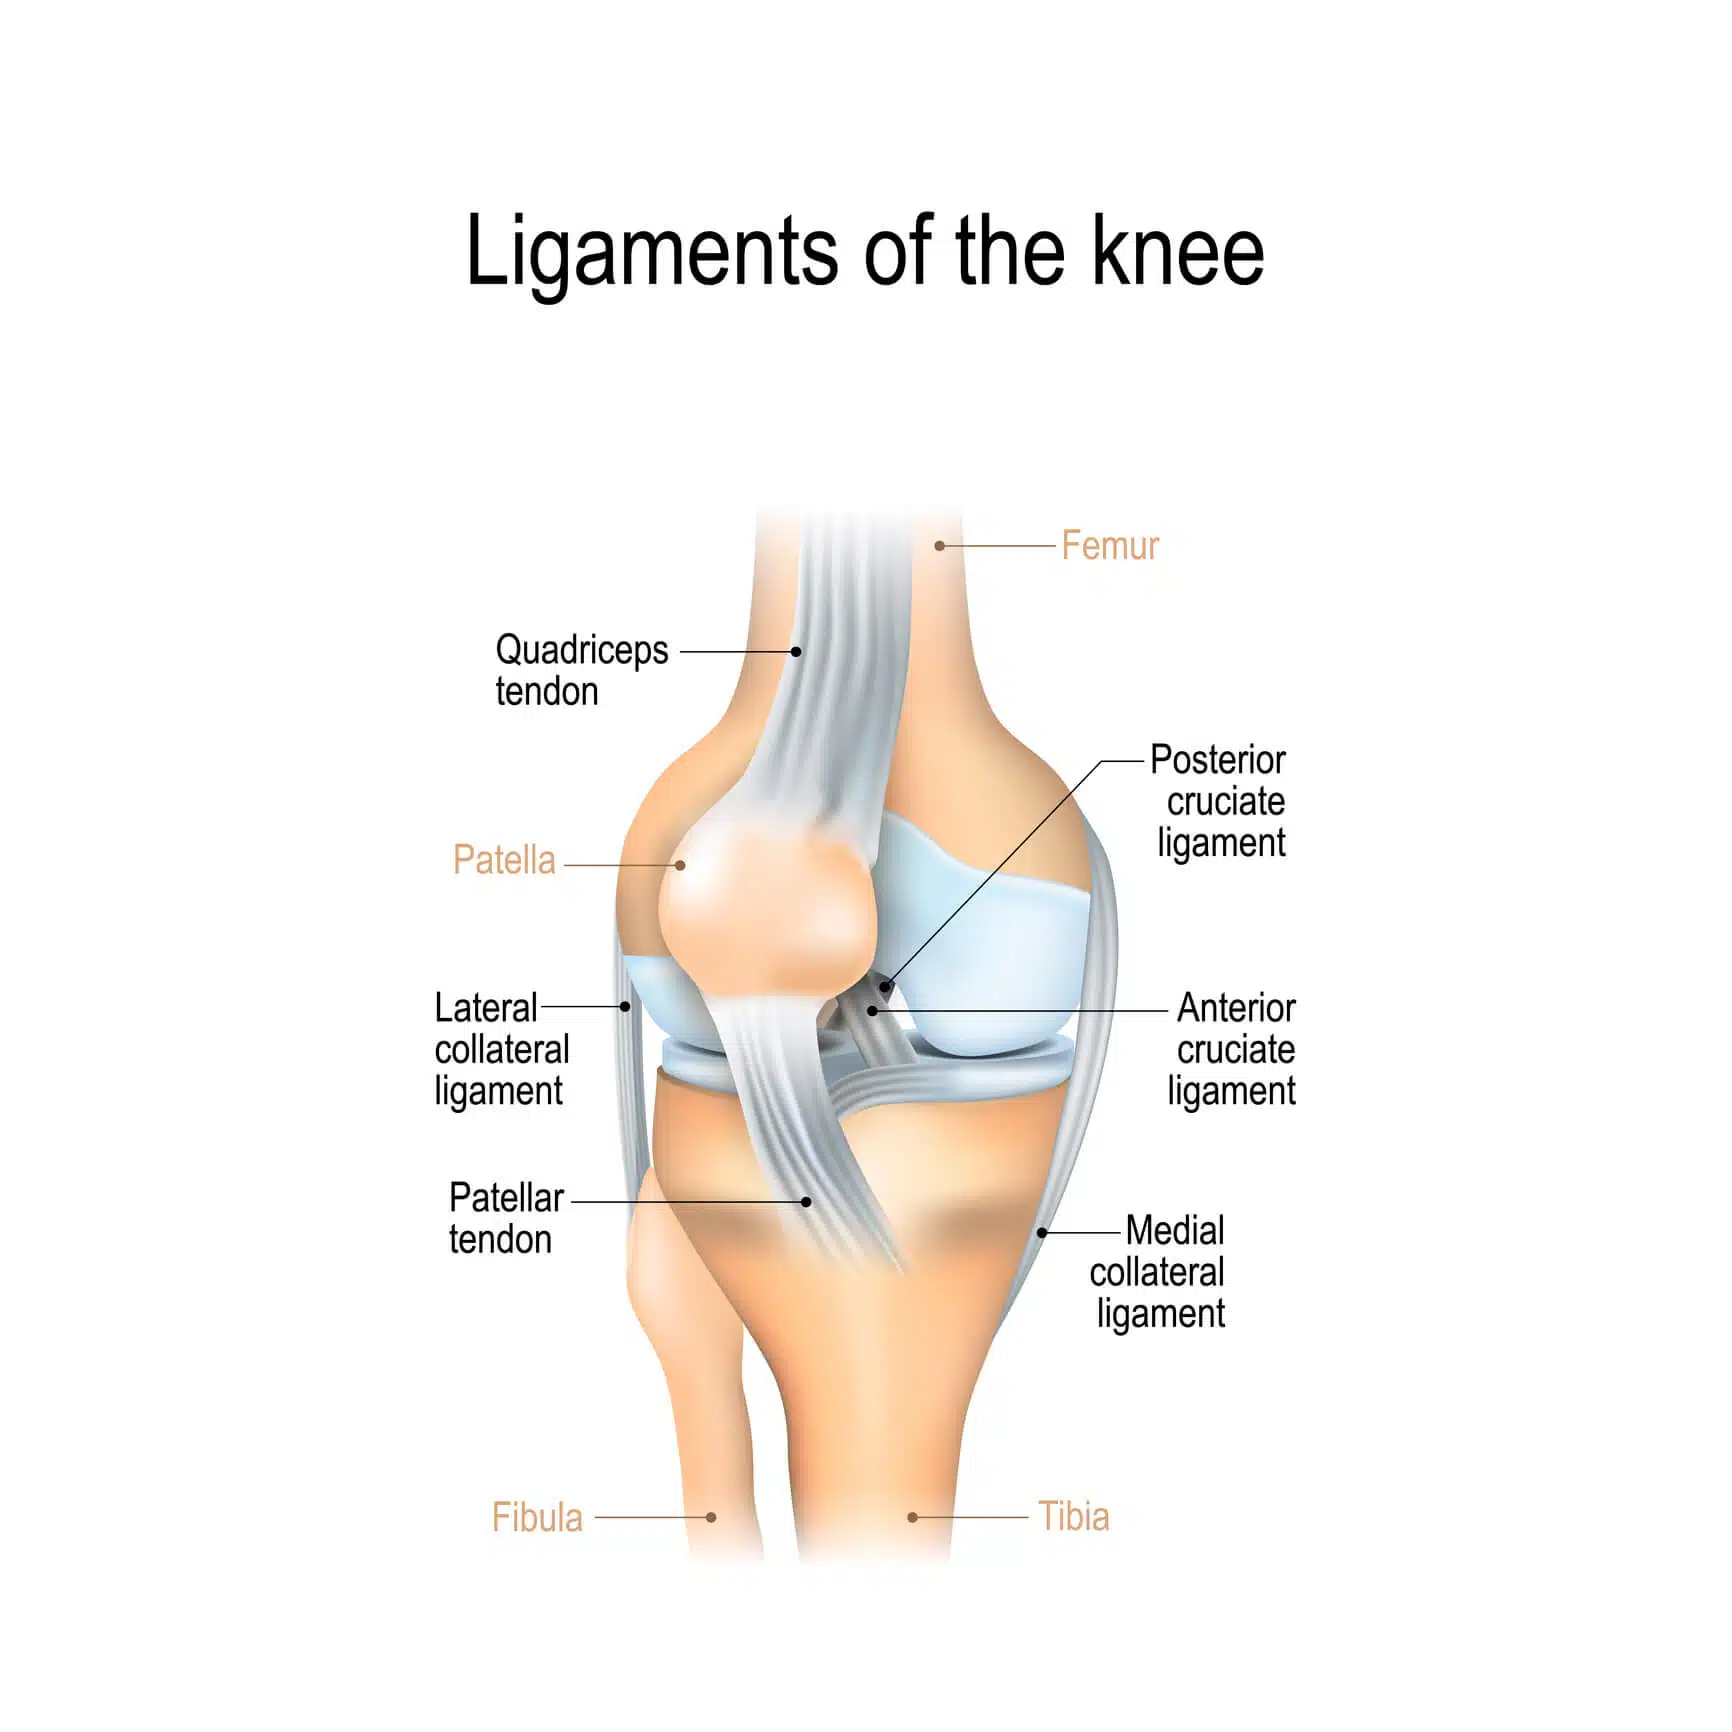 MCL - Medial Collalteral Ligament Information and Treatment